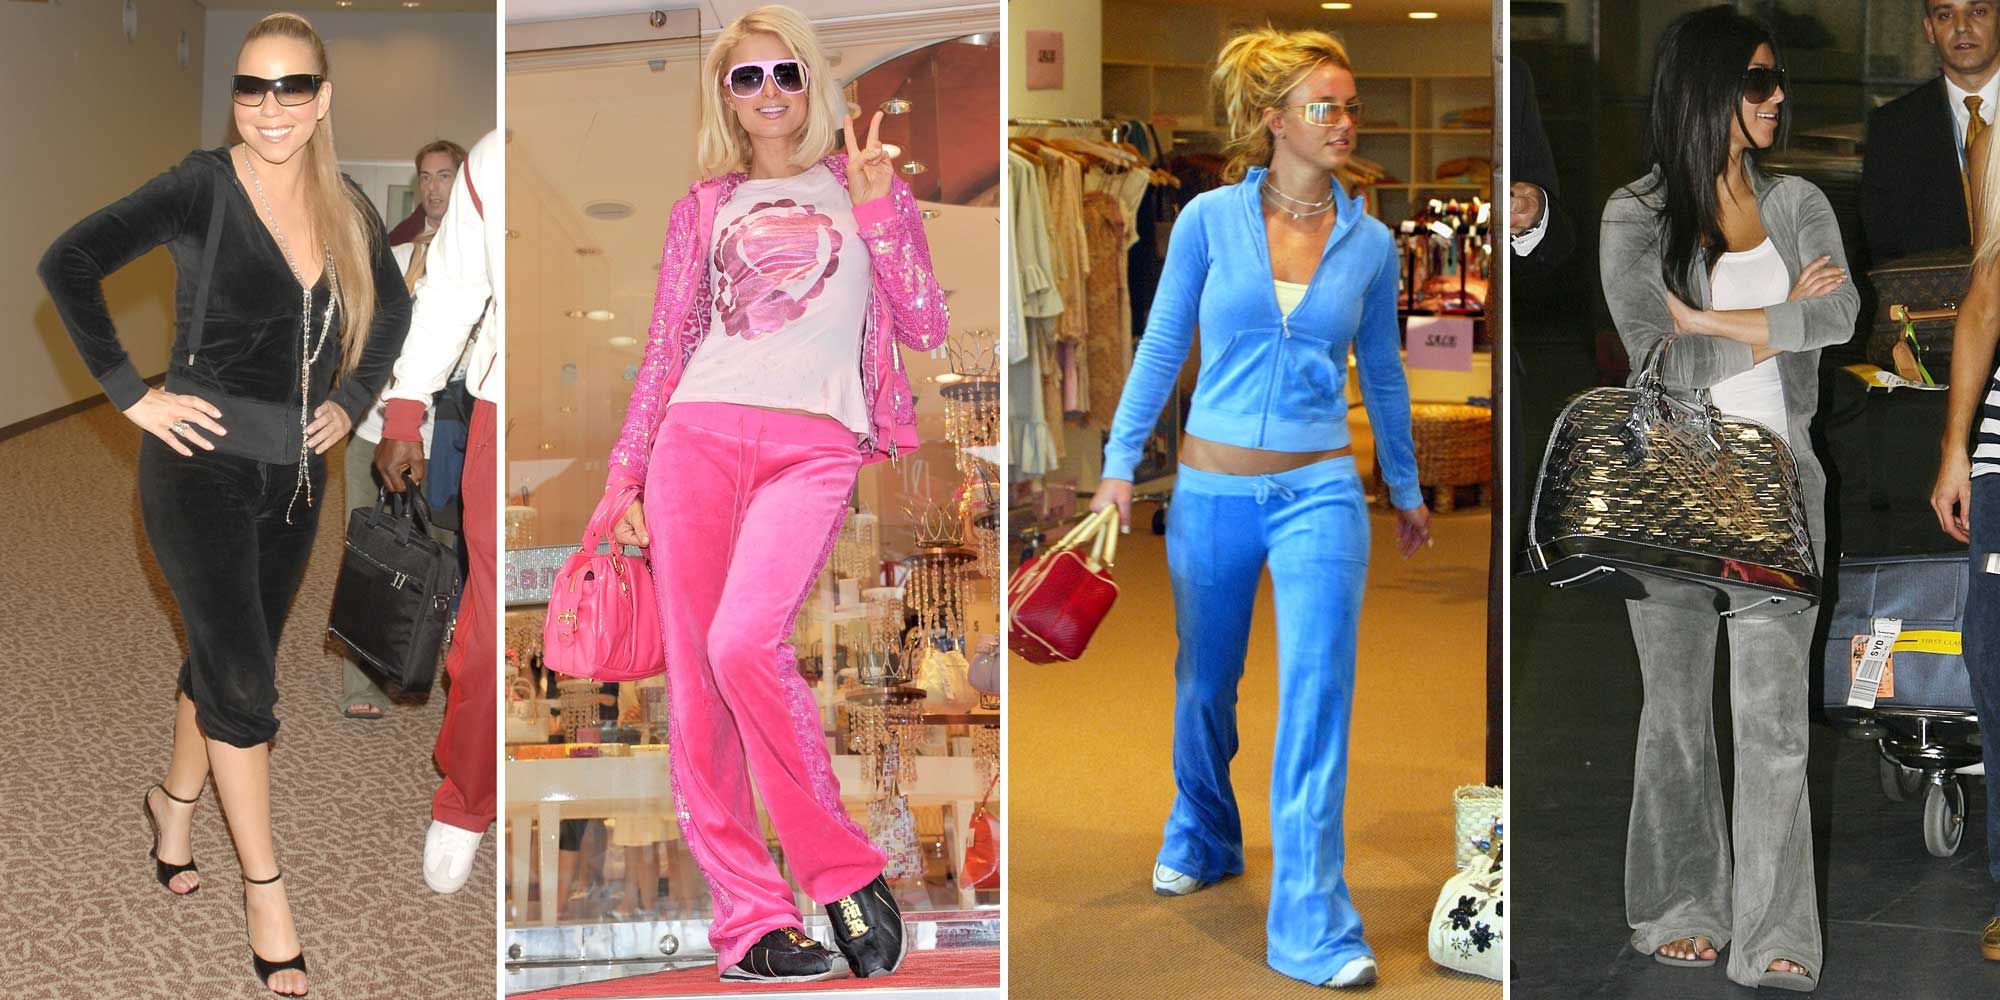 7 Women Wore Juicy Couture Tracksuits to Work and Everything Got